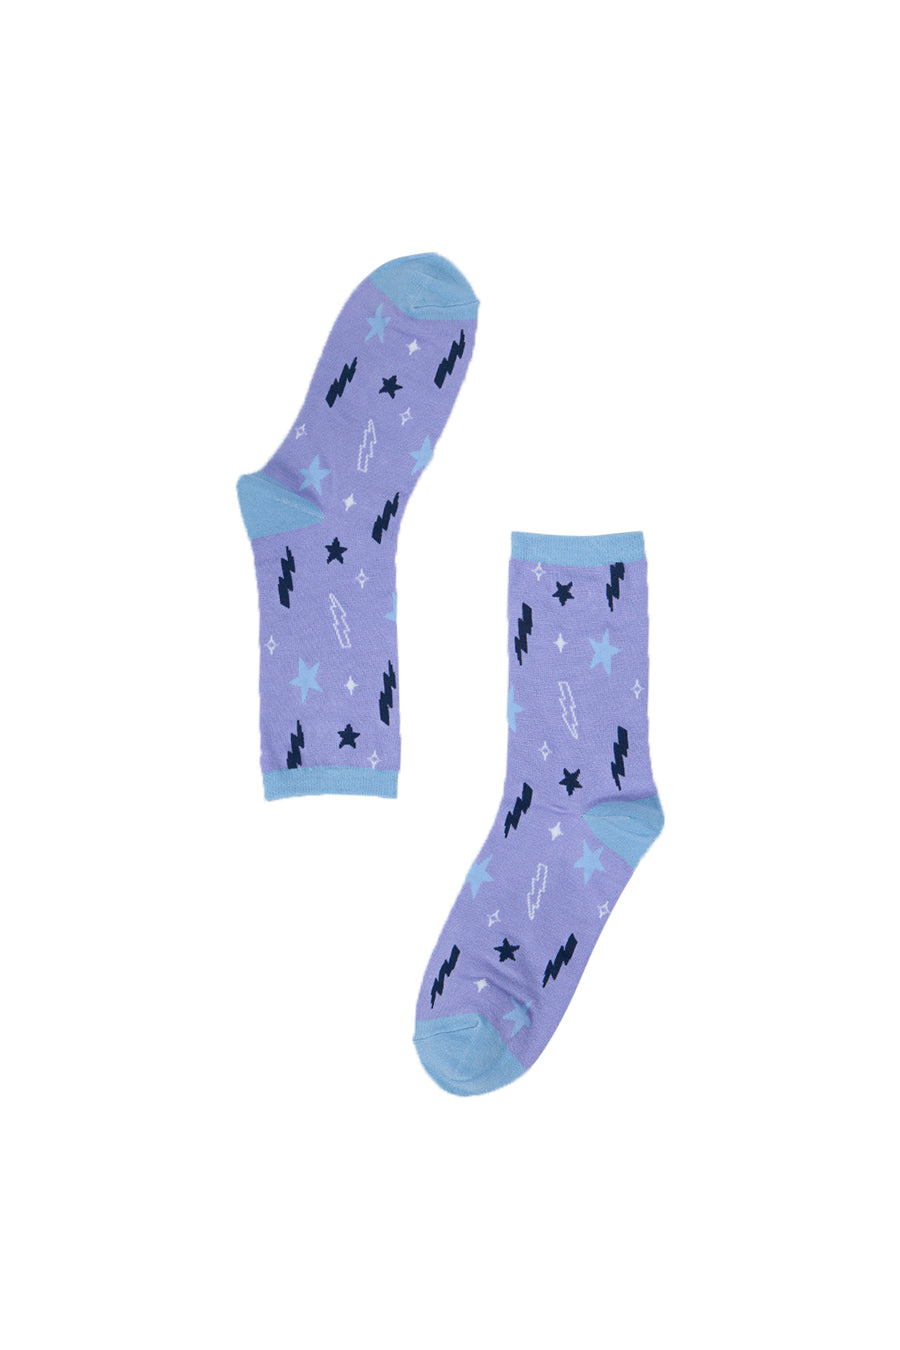 lilac ankle socks with thunderbolts and stars